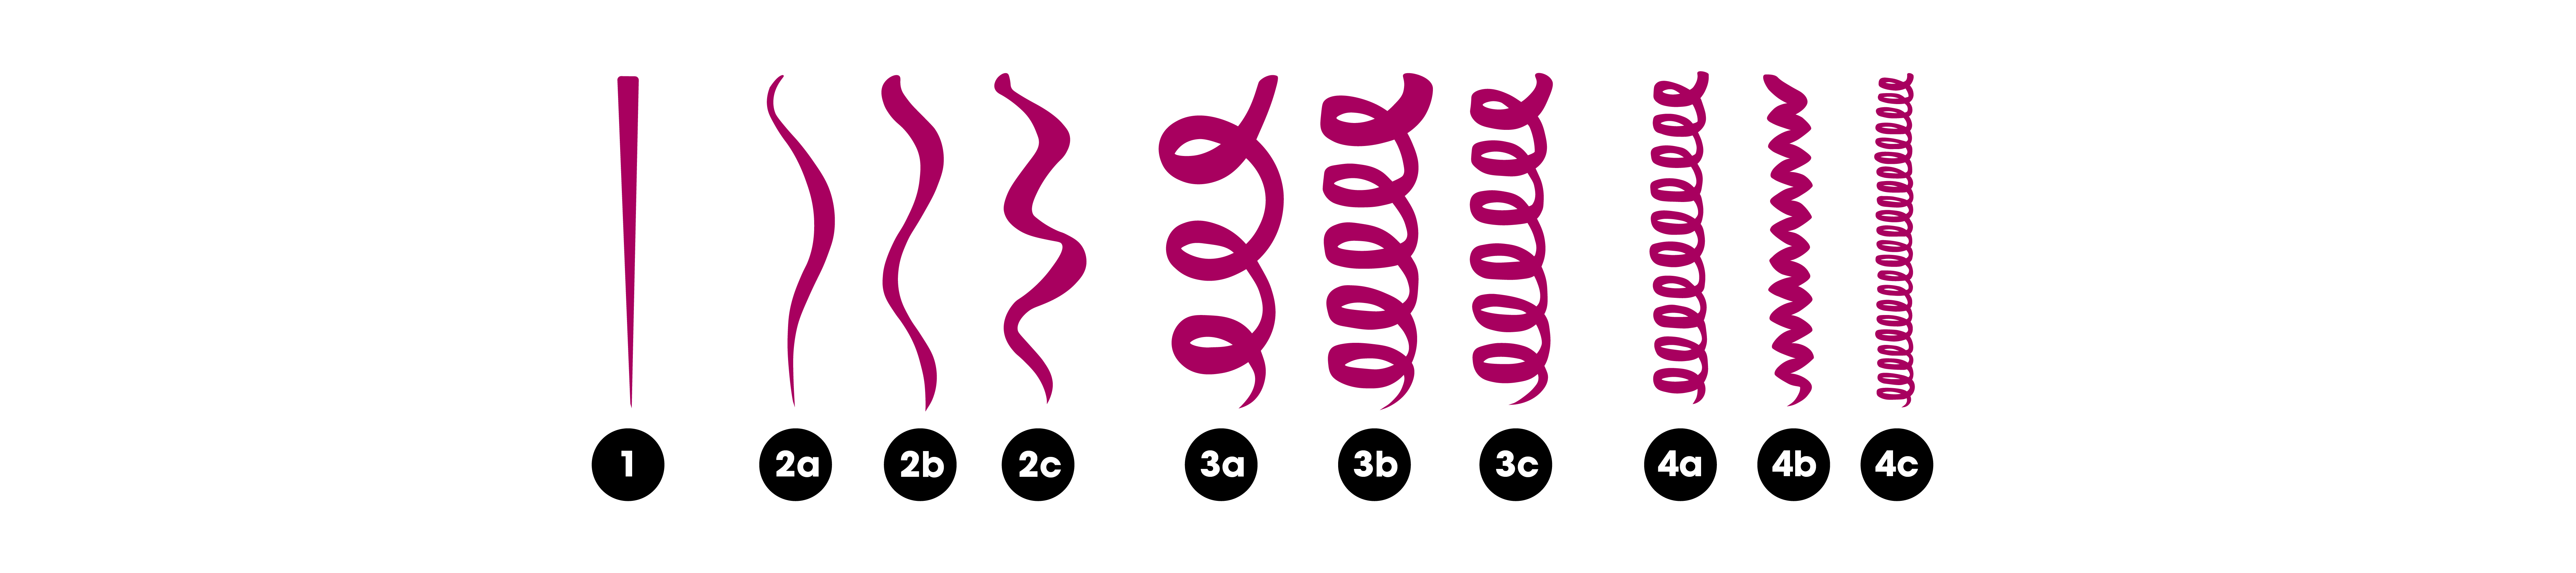 Different strands of graphic designed hair to show different curl patterns